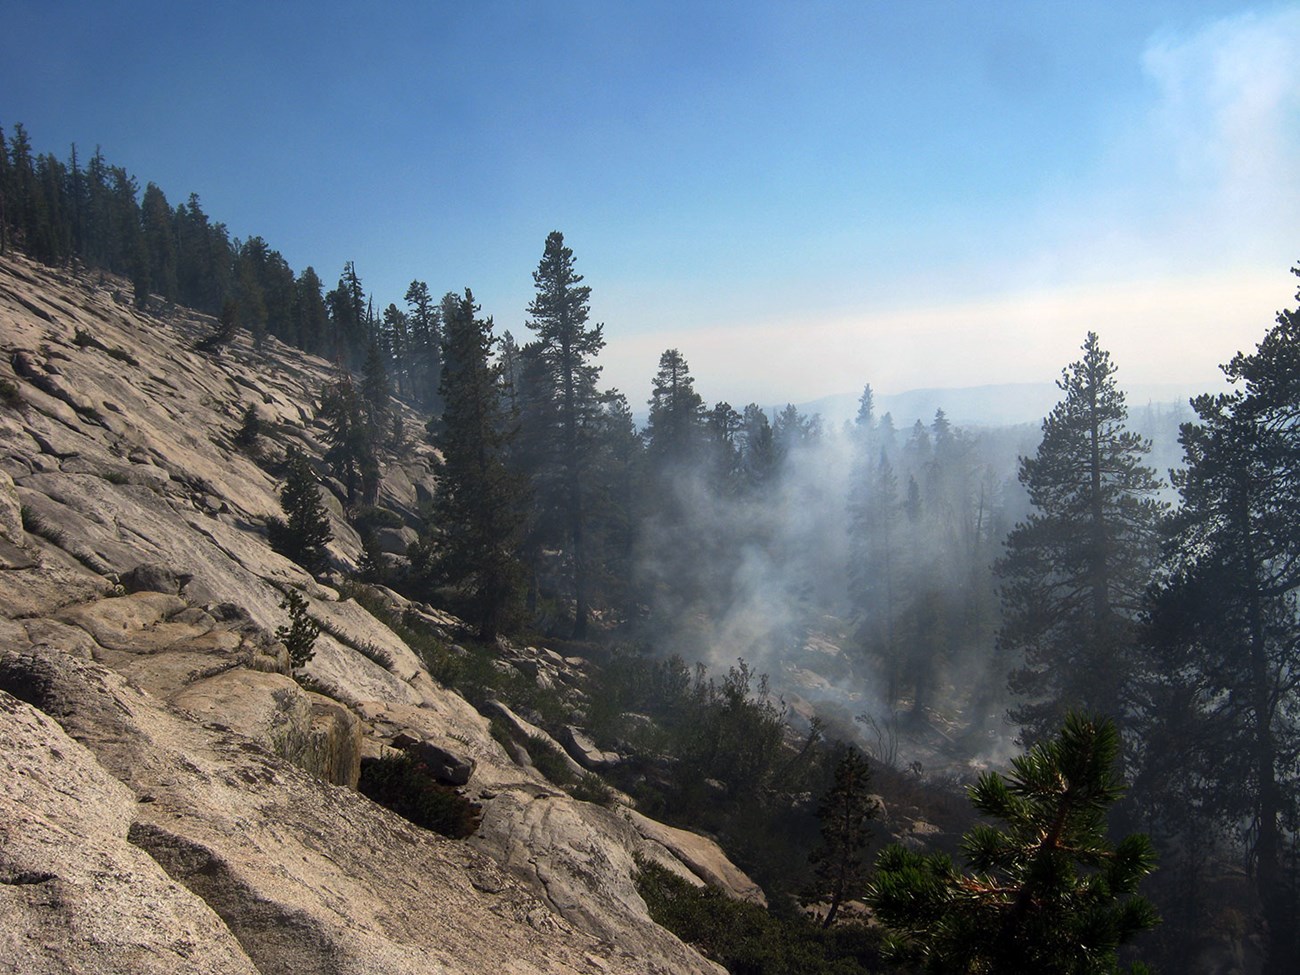 Light smoke rises from a forest near a bare rock face.